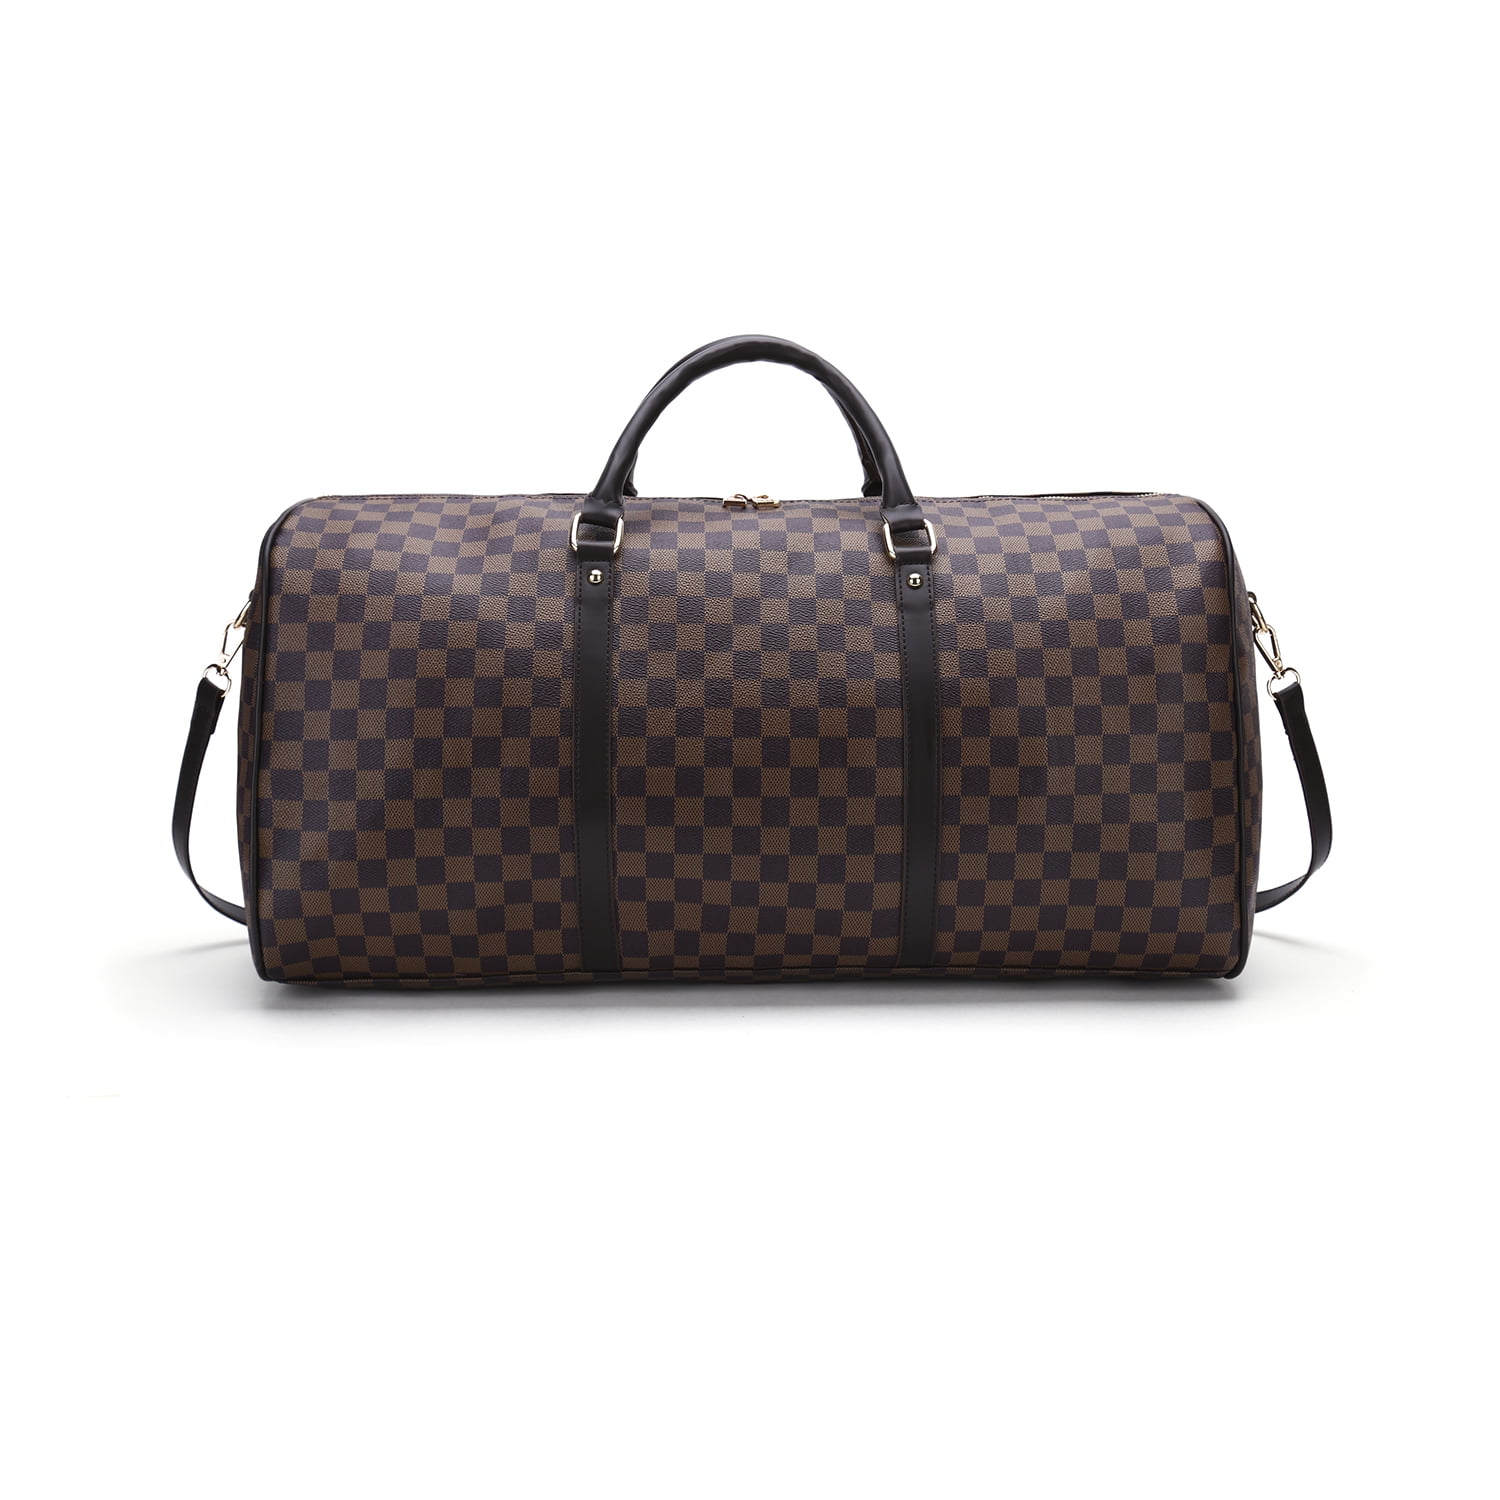 Bags, Brand New Brown Checkered Duffle